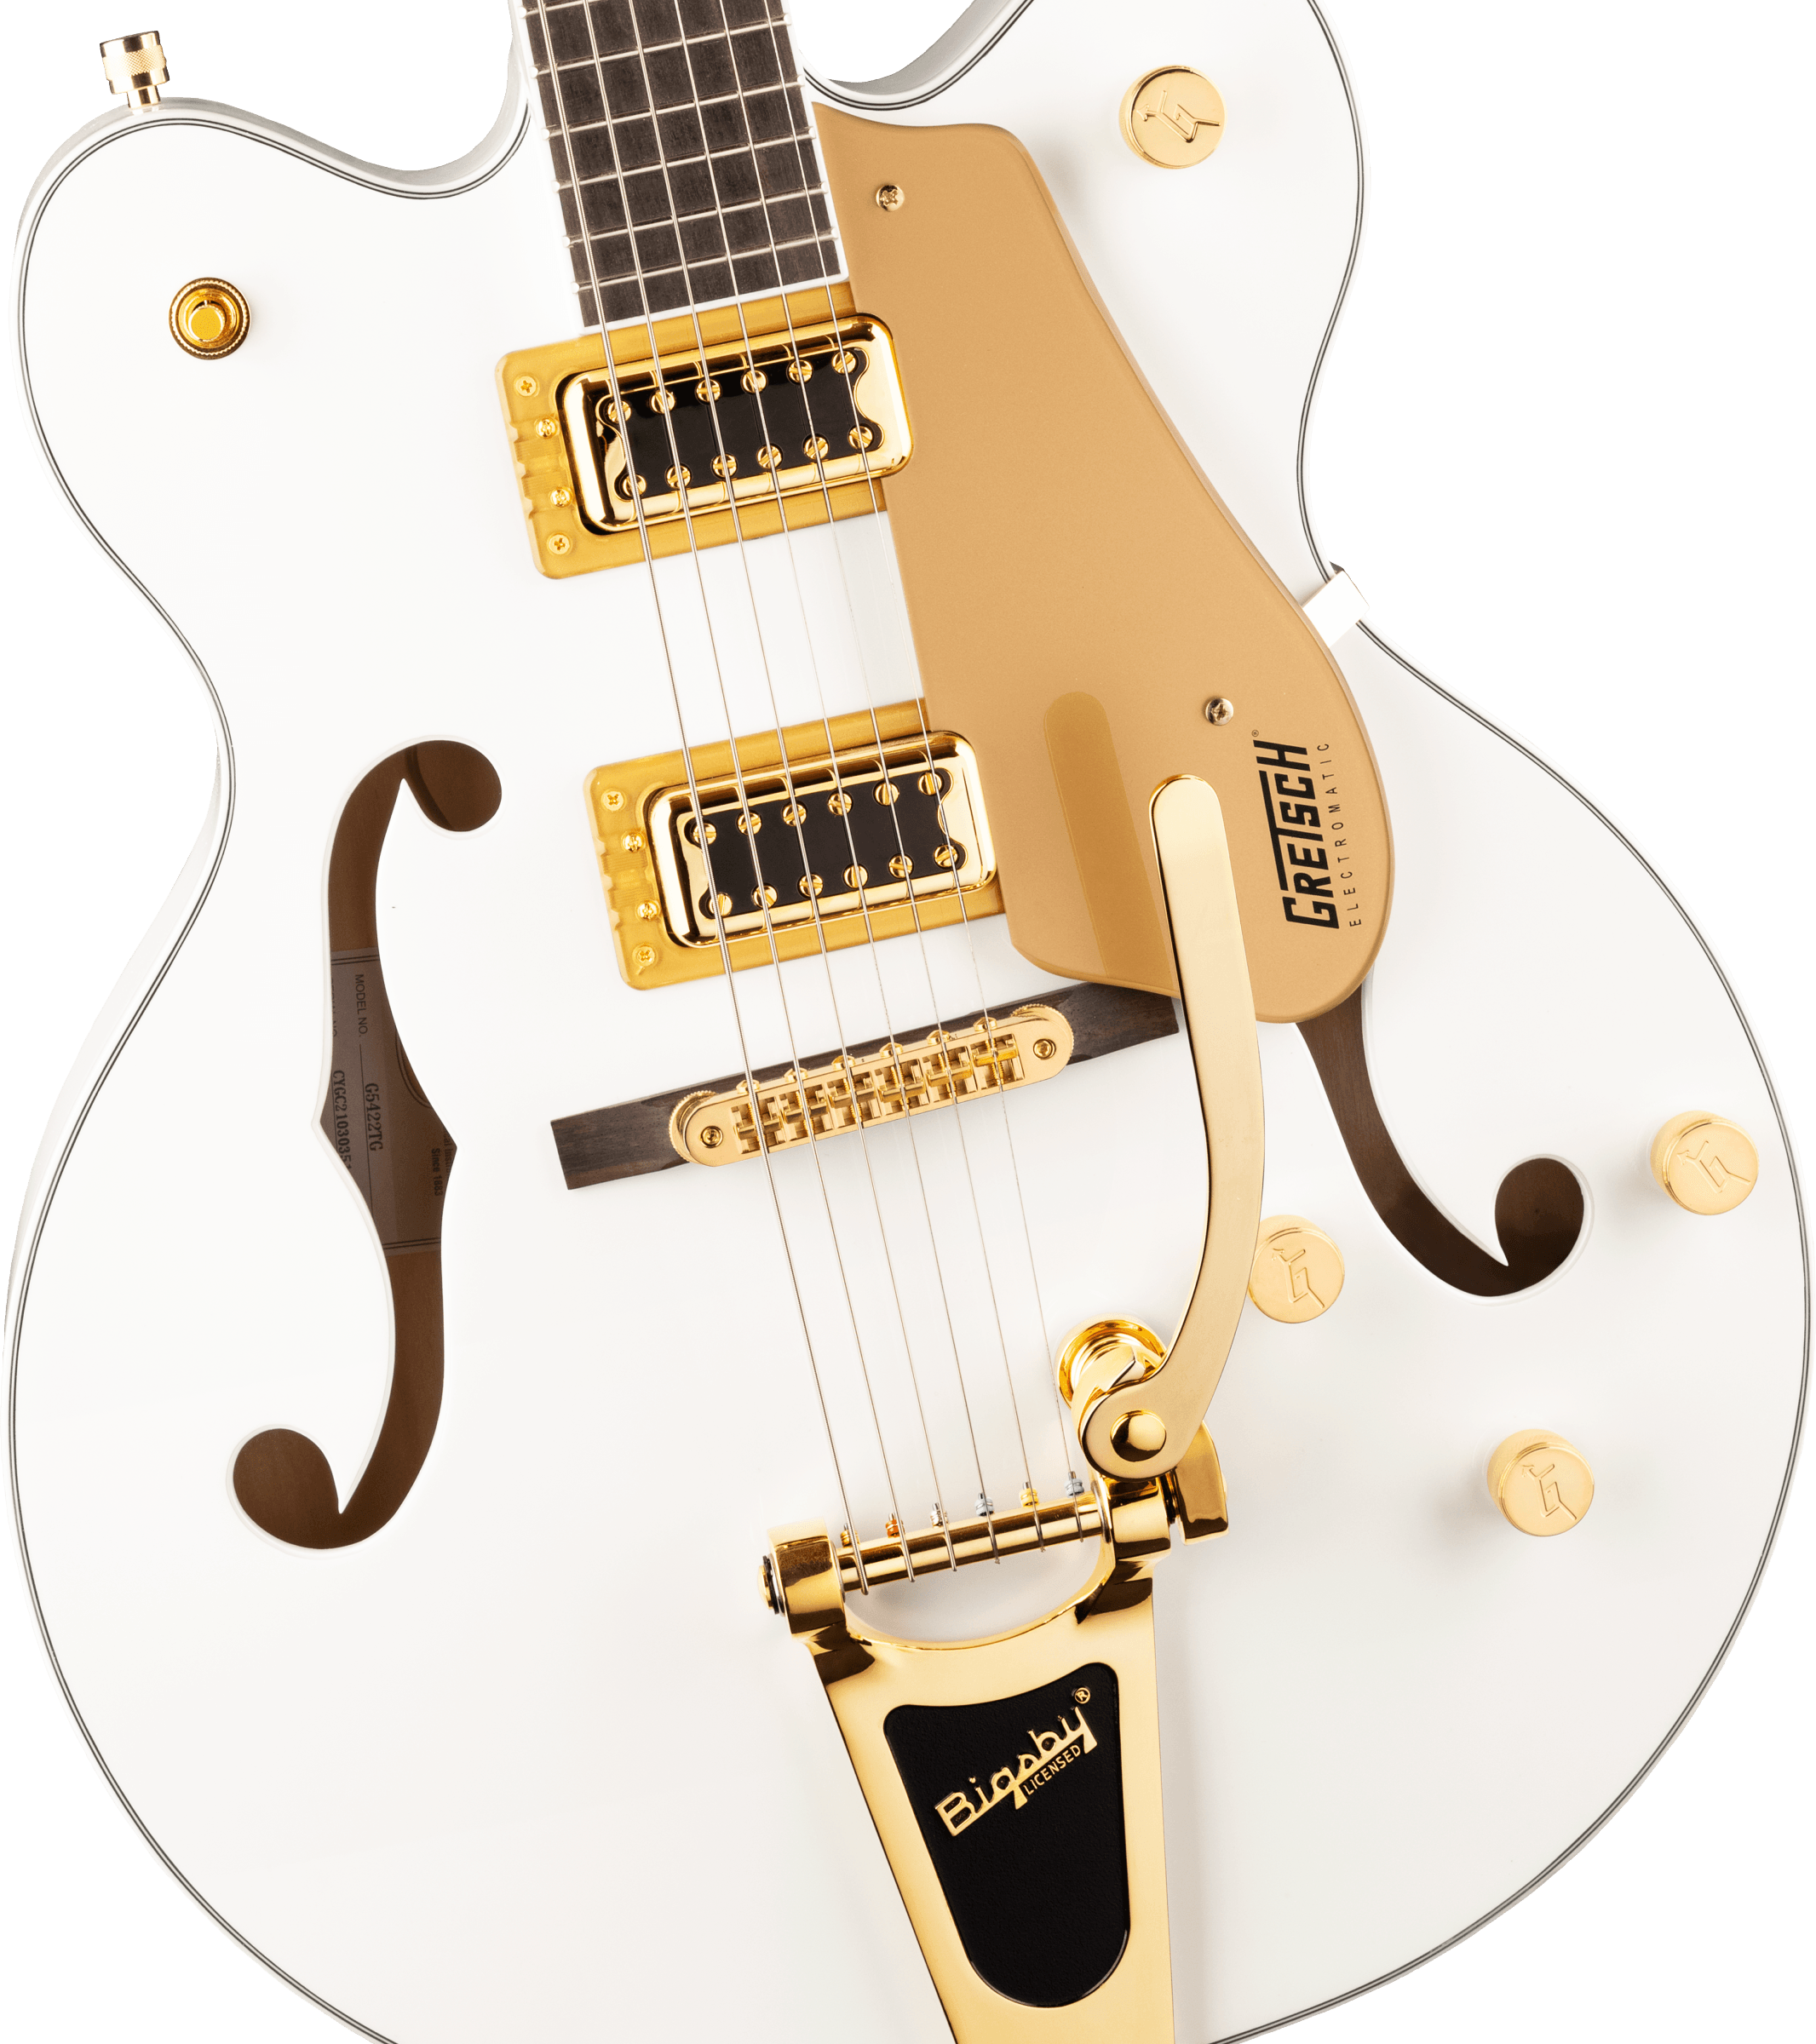  Gretsch G5422TG Electromatic Classic Hollow Body Double-Cut  6-String Electric Guitar with 12-Inch-Radius Laurel Fingerboard, Bigsby and Gold  Hardware (Right-Handed, Walnut Stain) : Musical Instruments